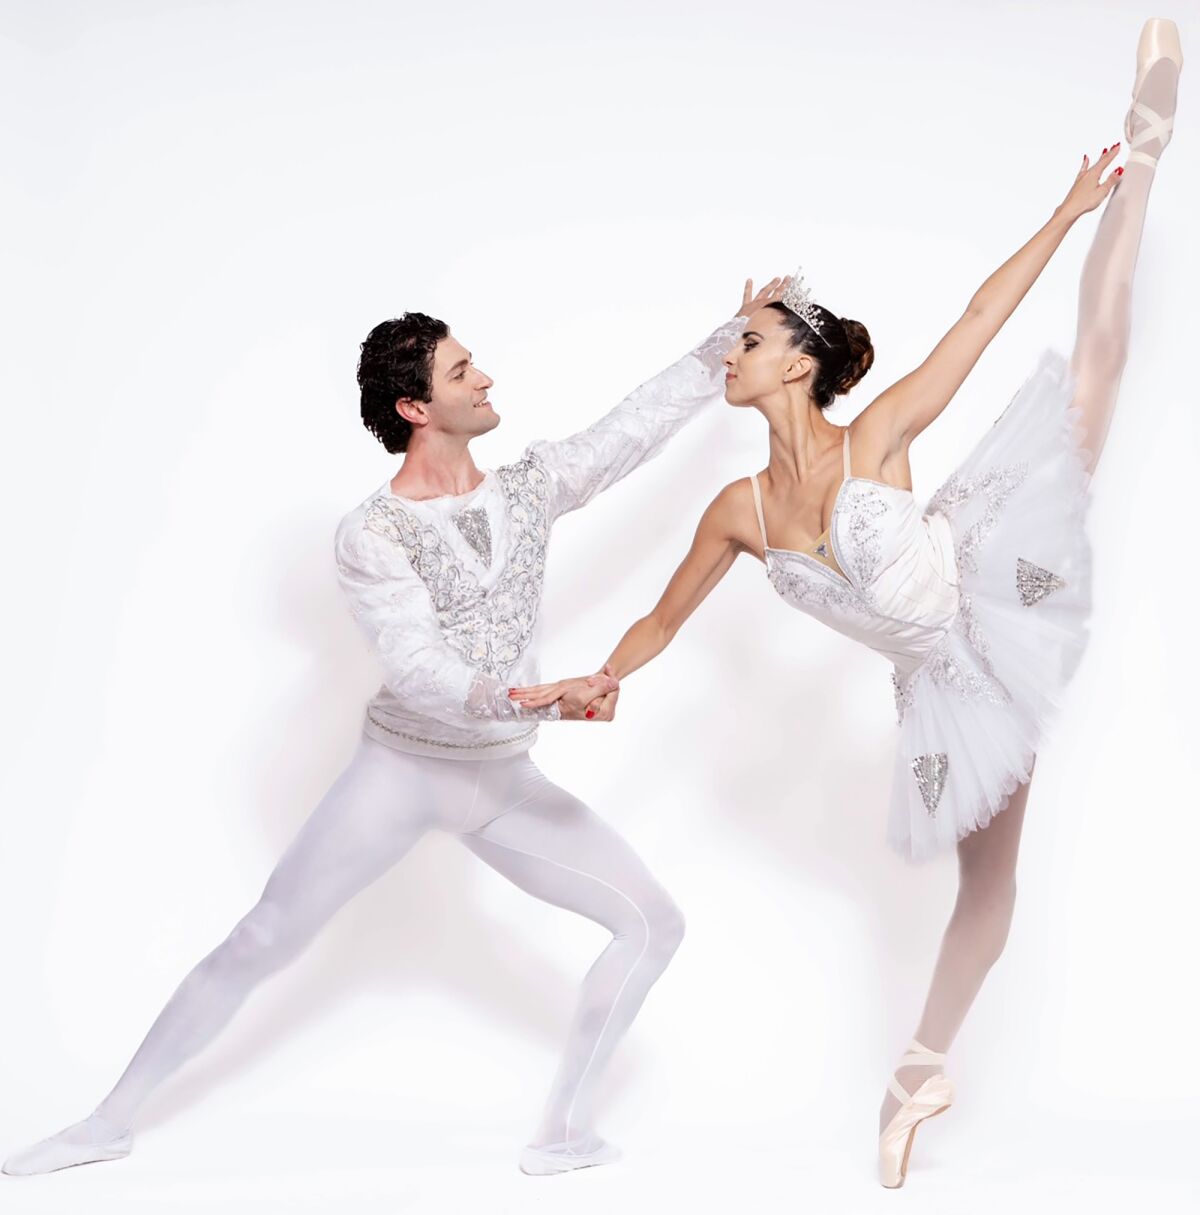 A male ballet dancer lunges, with a ballerina on pointe. 